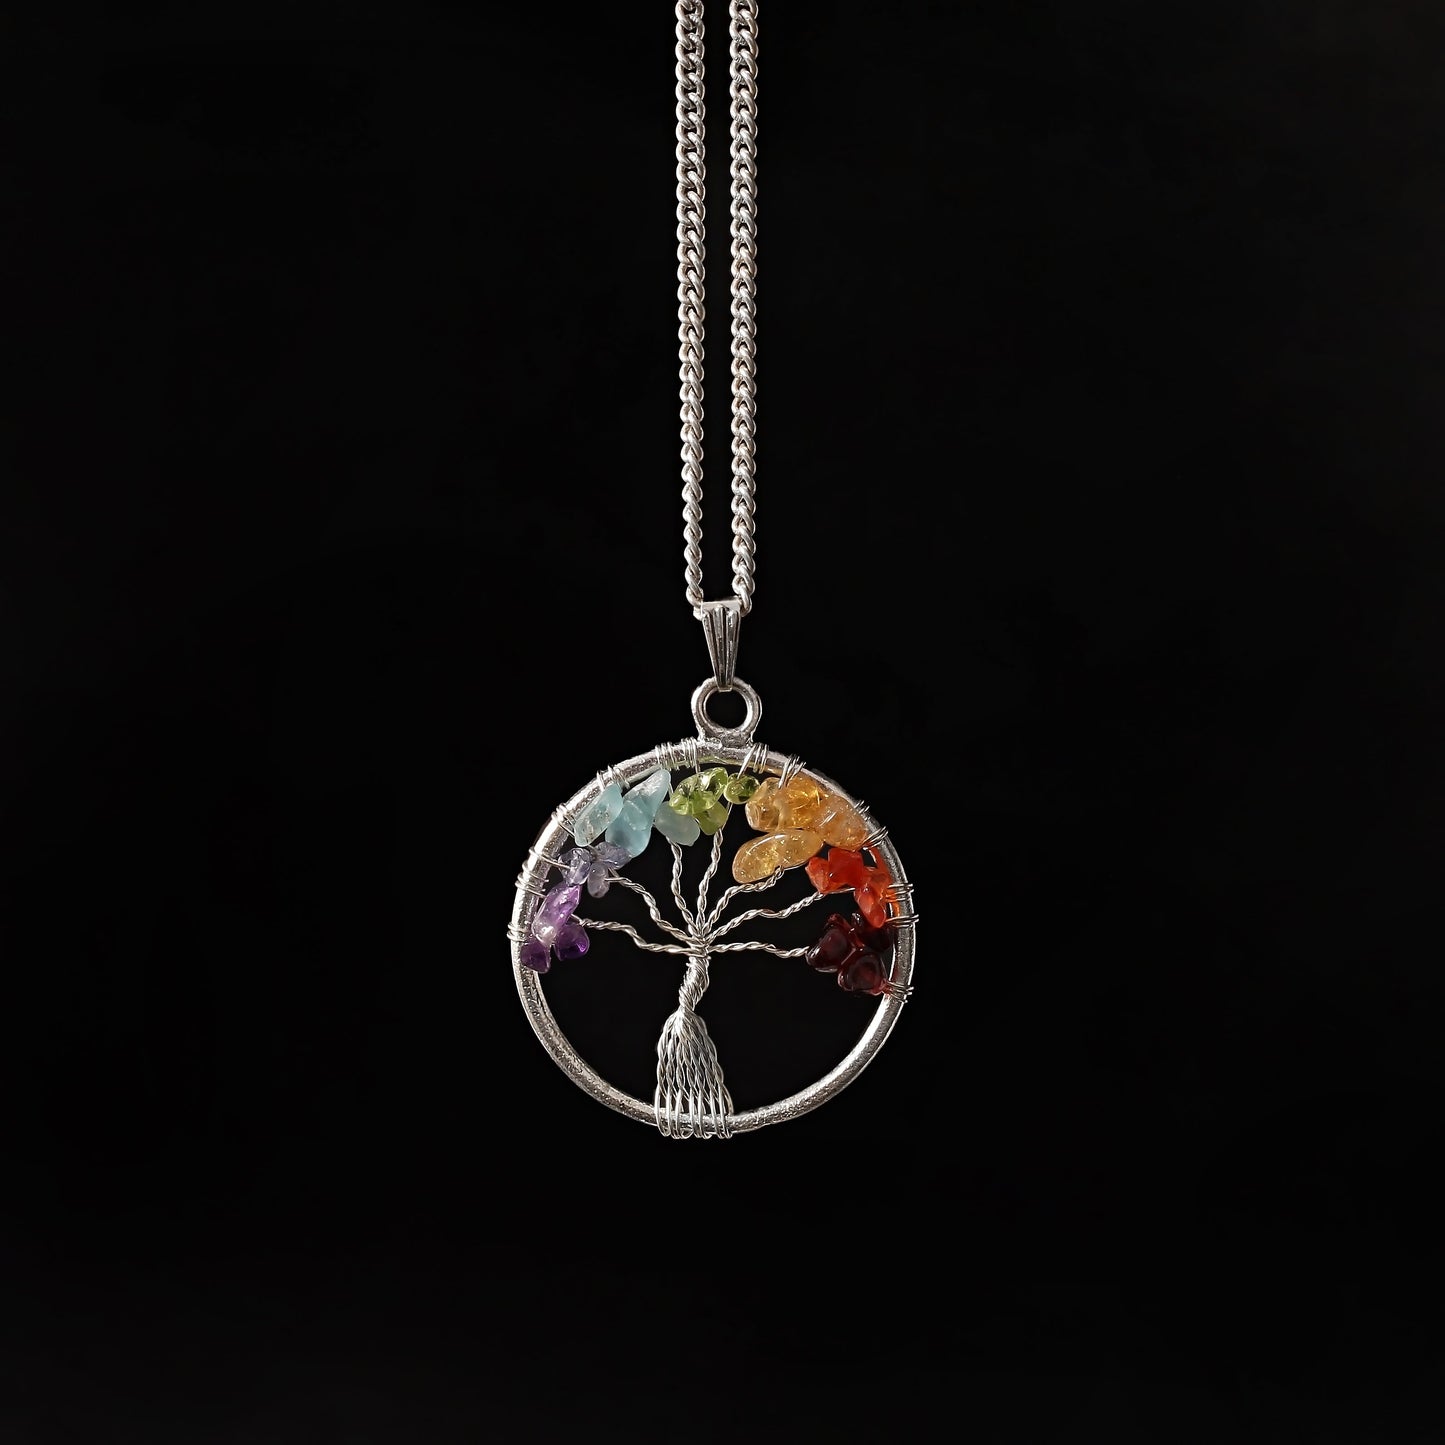 925 sterling silver tree of life pattern 7 chakra healing gemstone pendant with silver chain